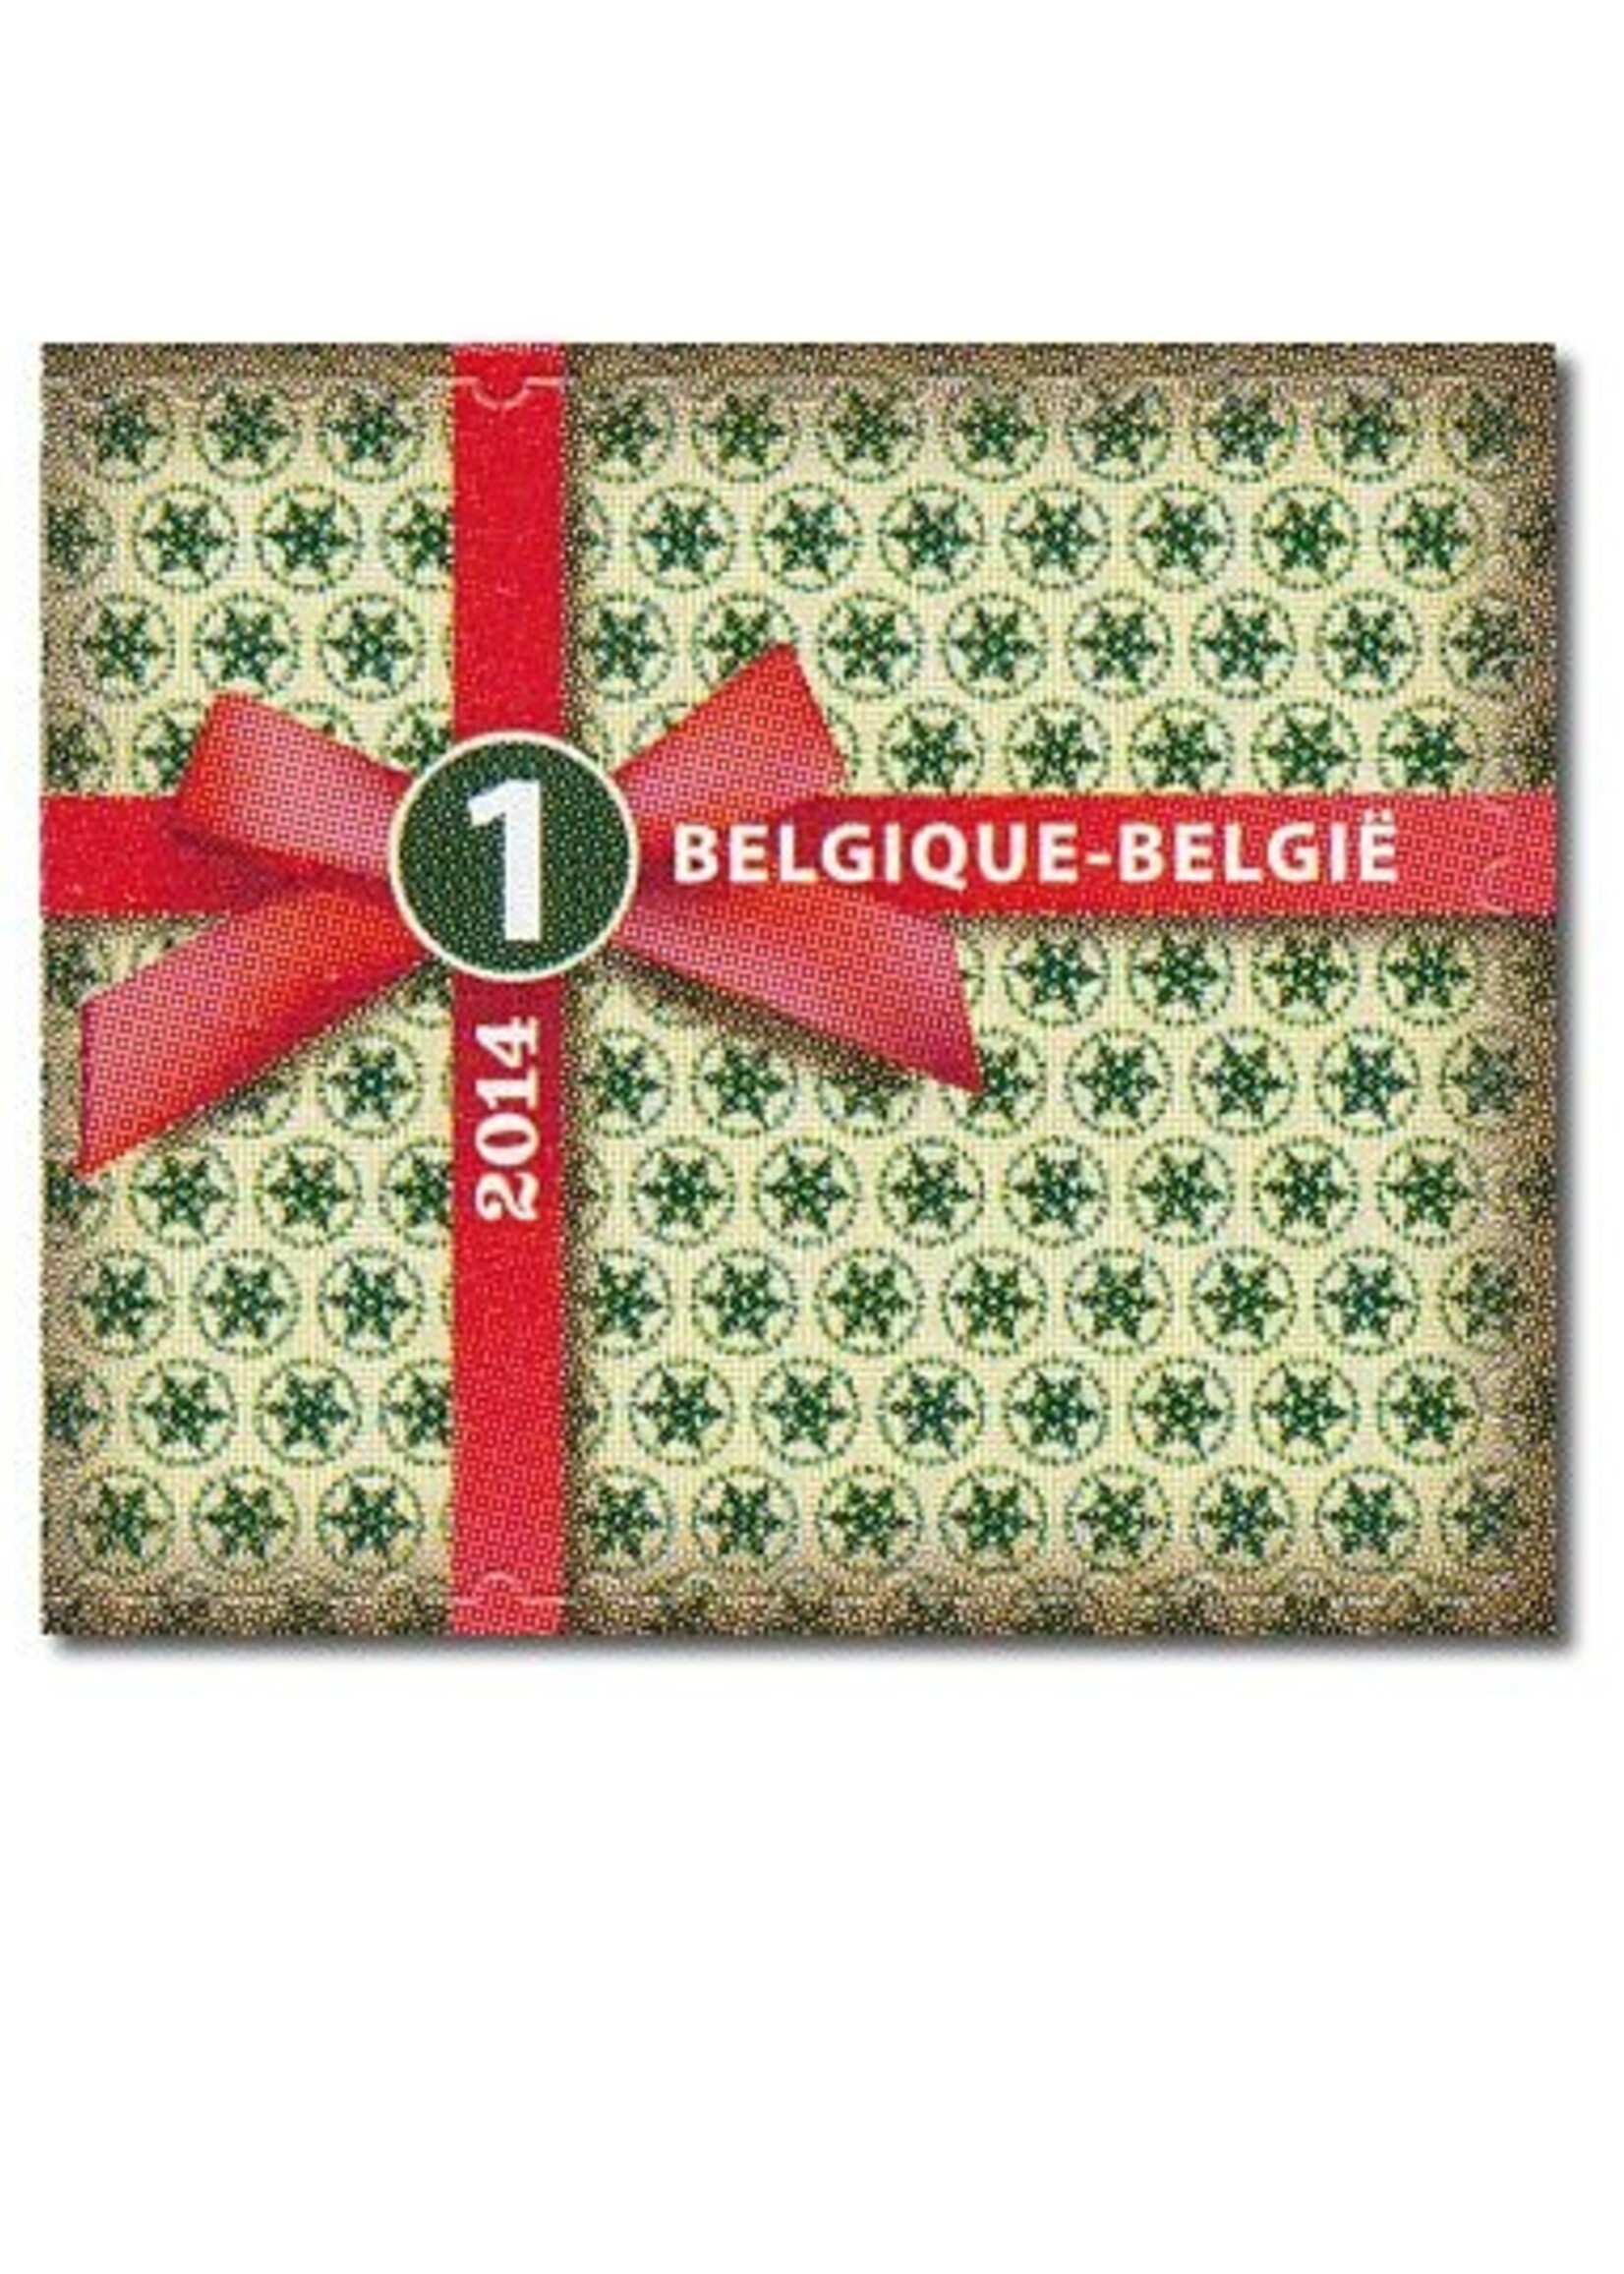 Theme Christmas - Booklet with 10 self-adhesive stamps - Rate 1, Belgium